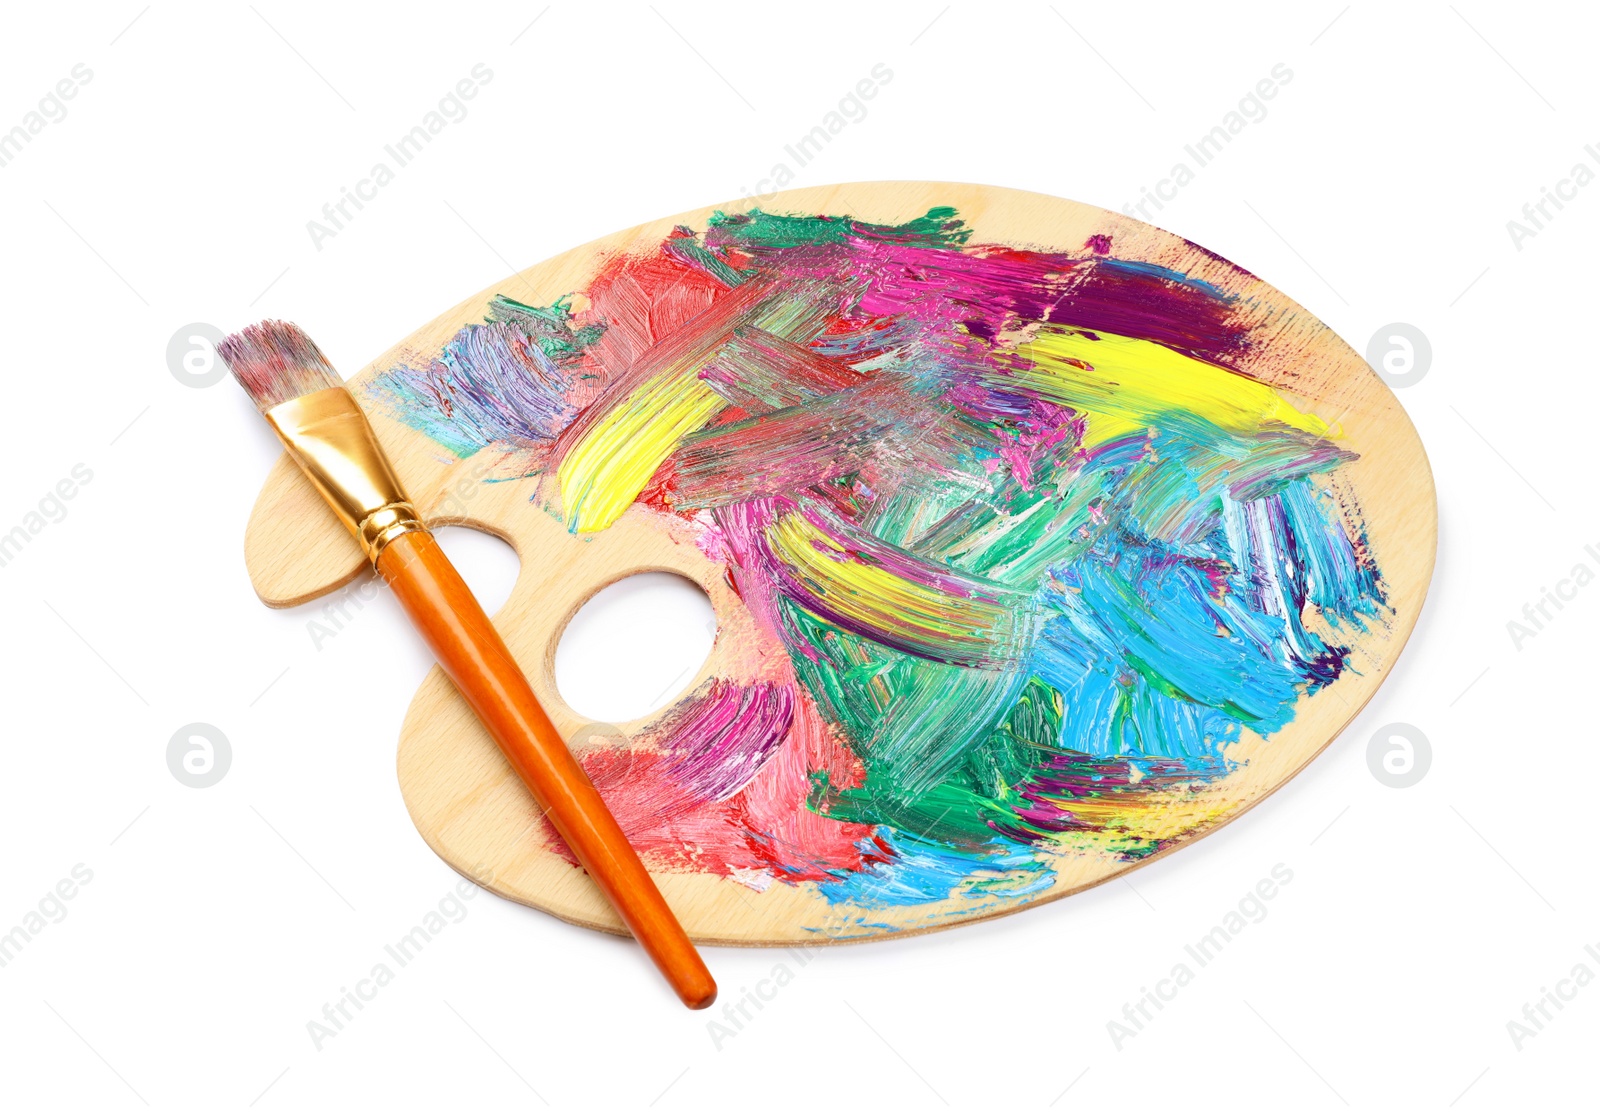 Photo of Wooden artist's palette with mixed paints and brush isolated on white